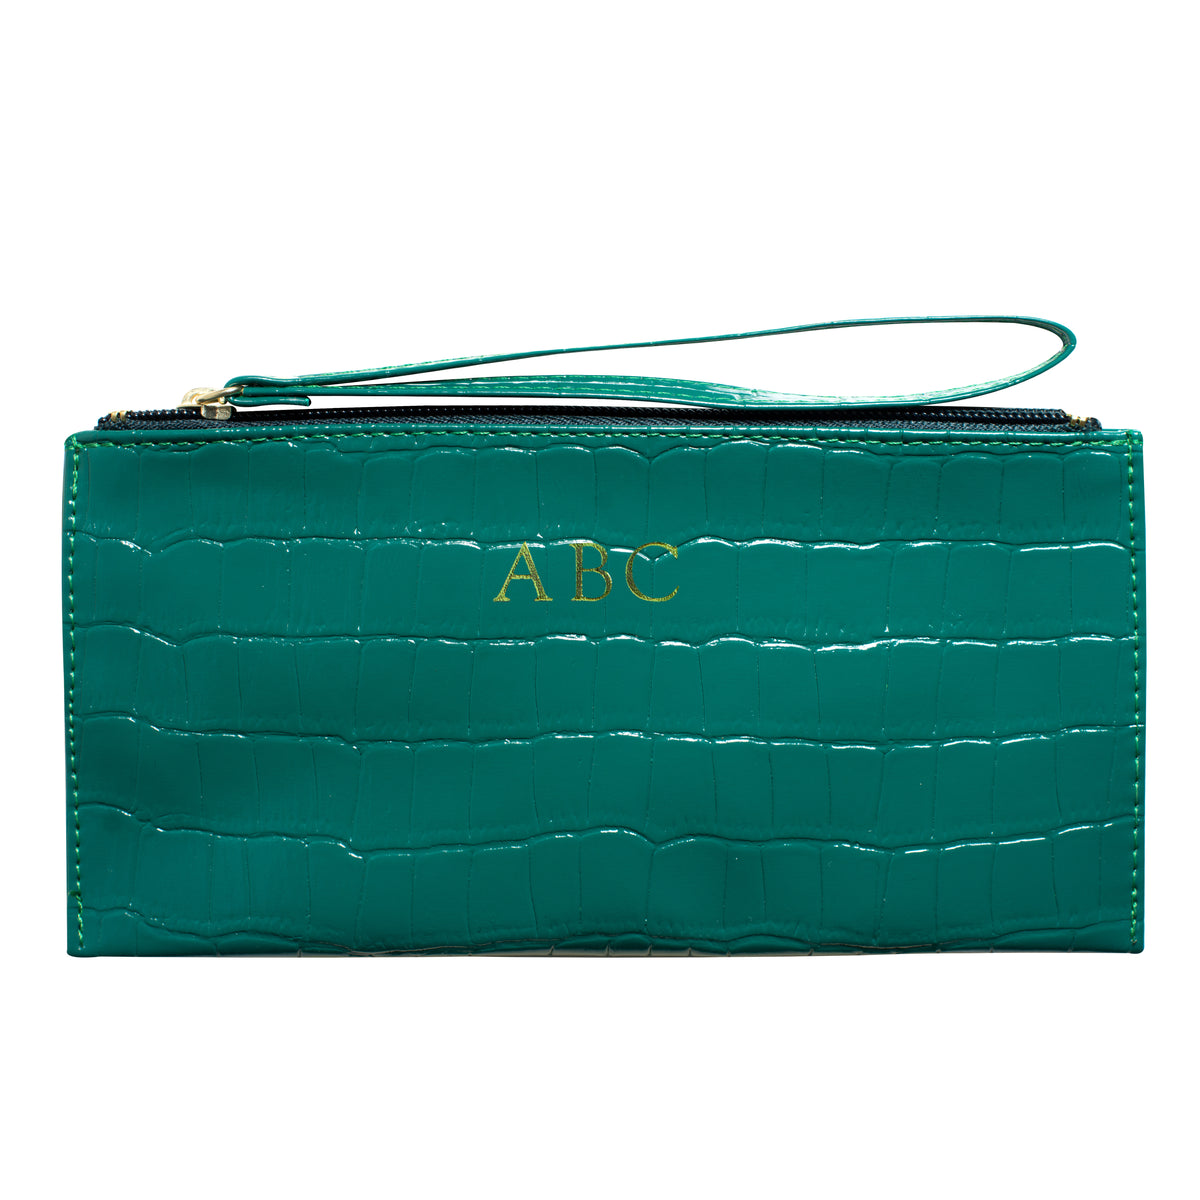 Drilo Forest Green Patent Leather Wristlet Bag 